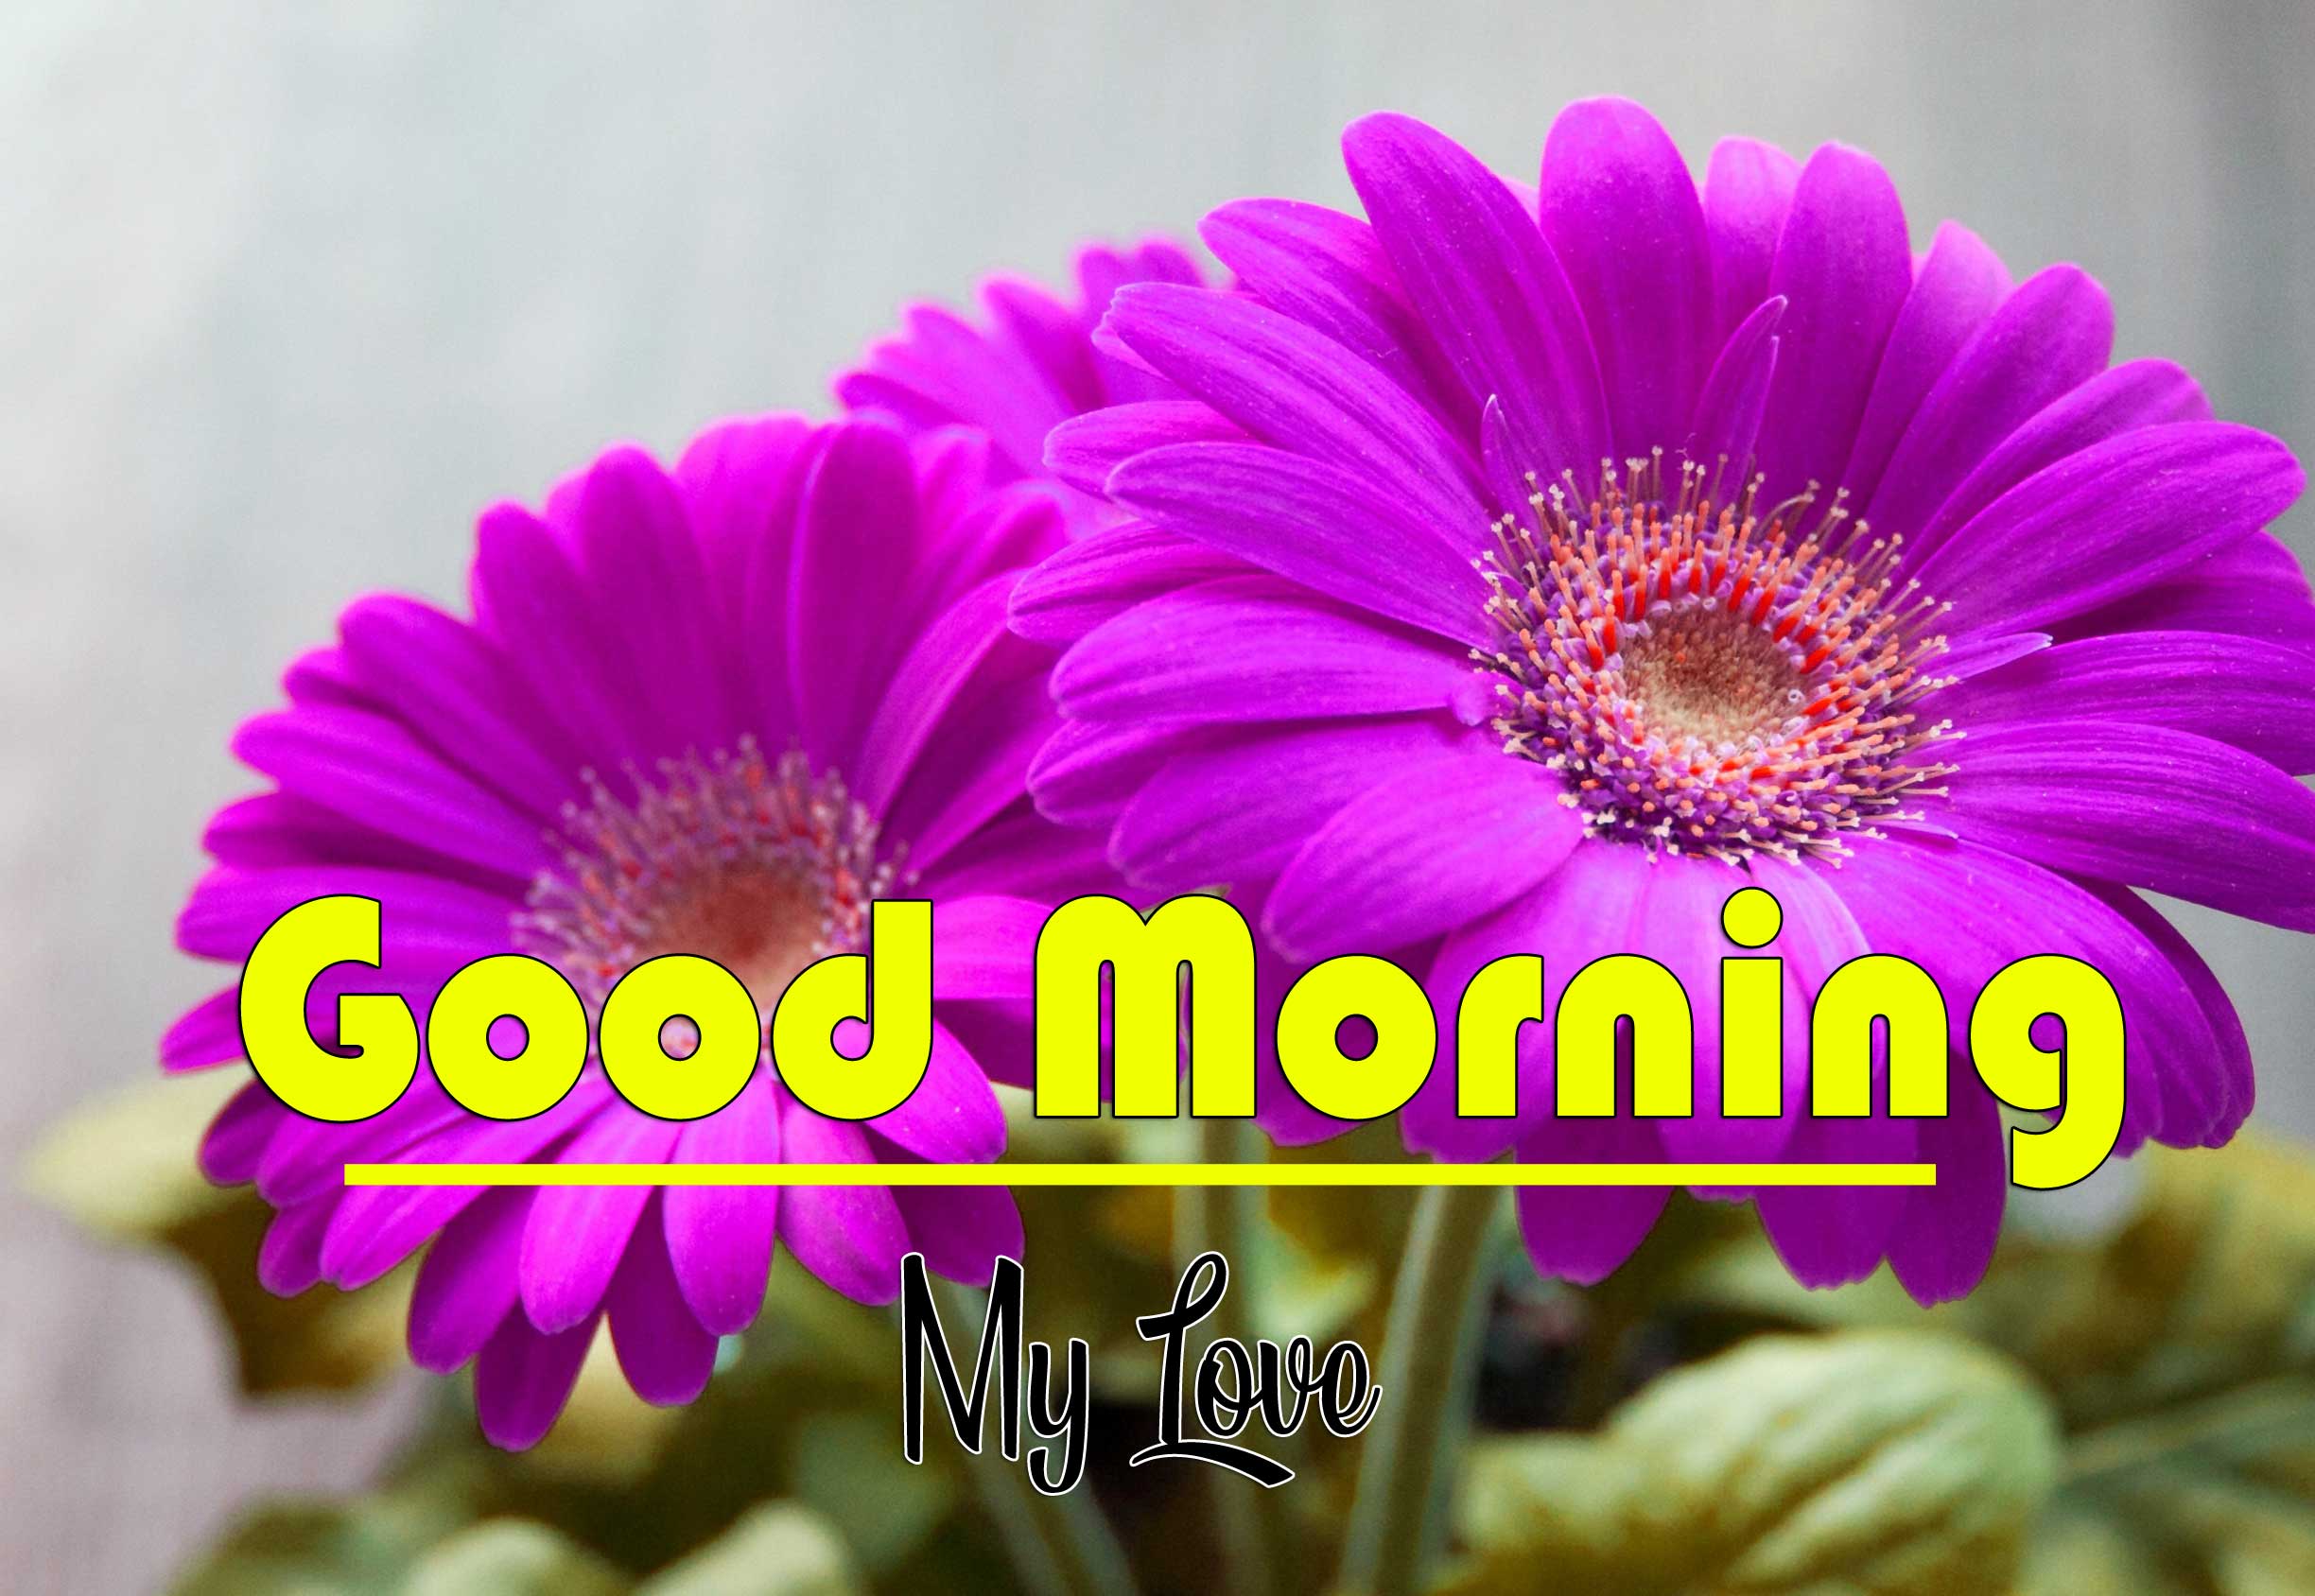 Good Morning Wishes pics Wallpaper Download 